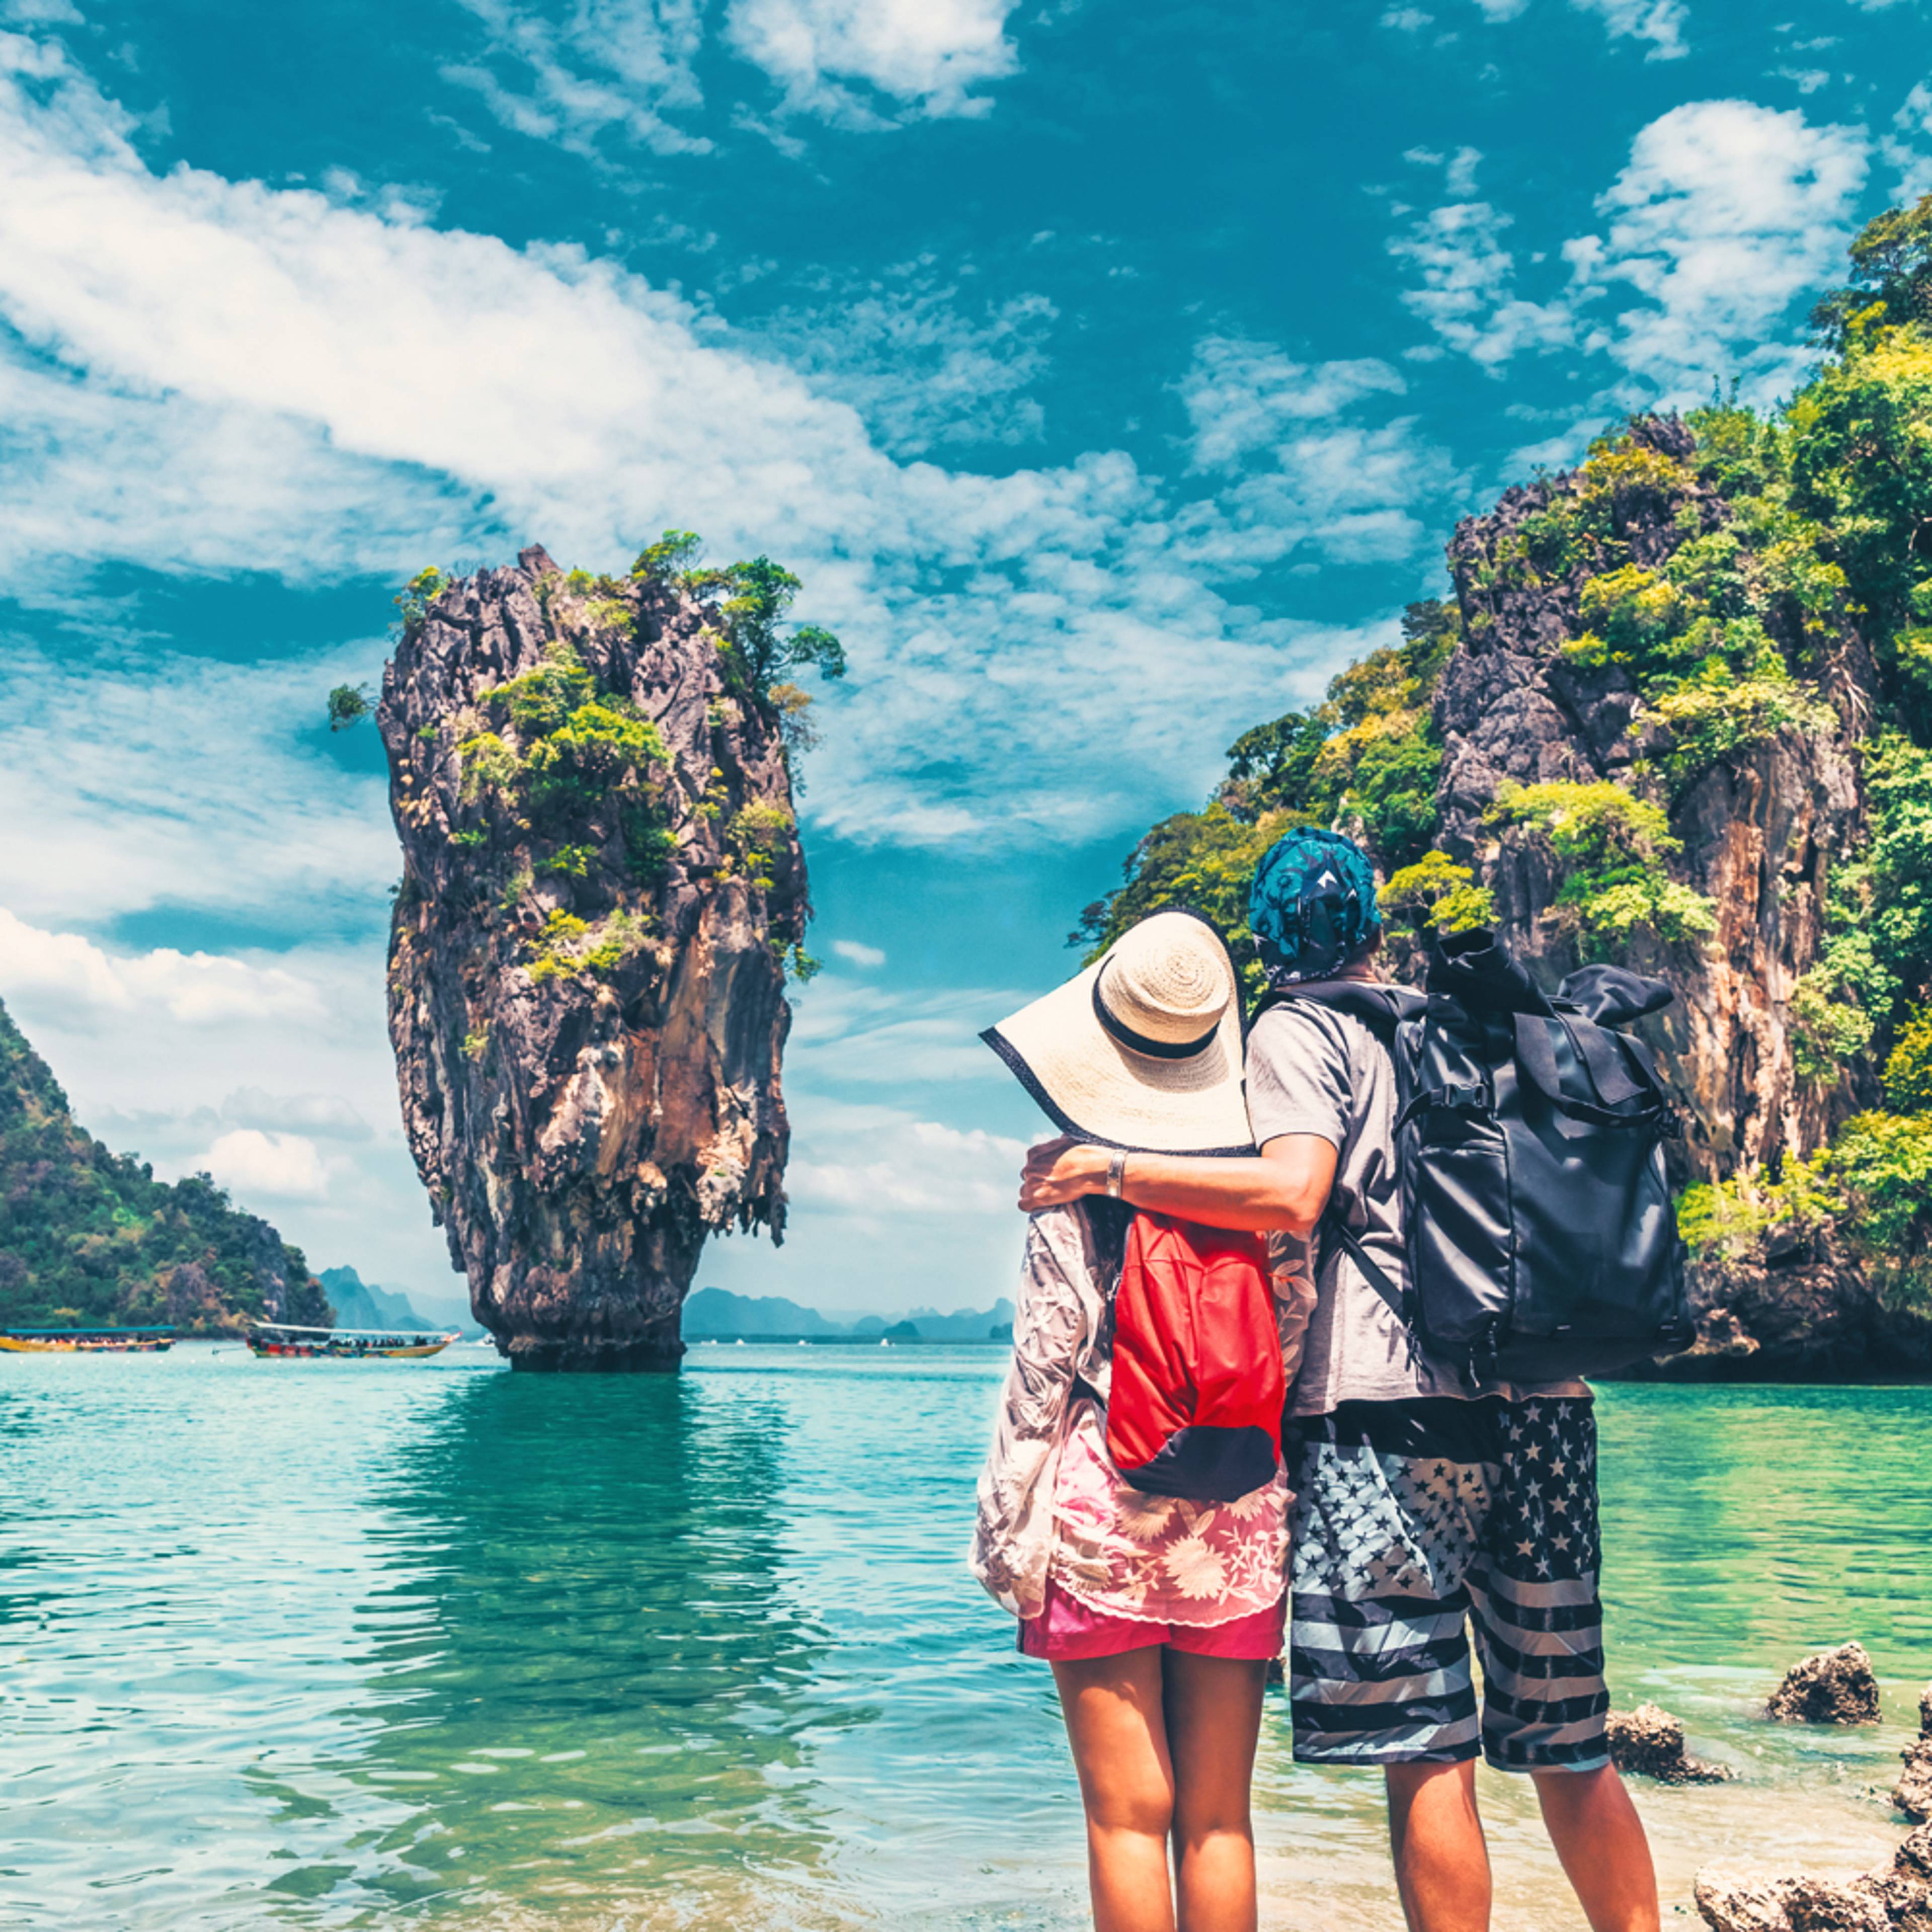 Design your romantic getaway with a local expert in Thailand